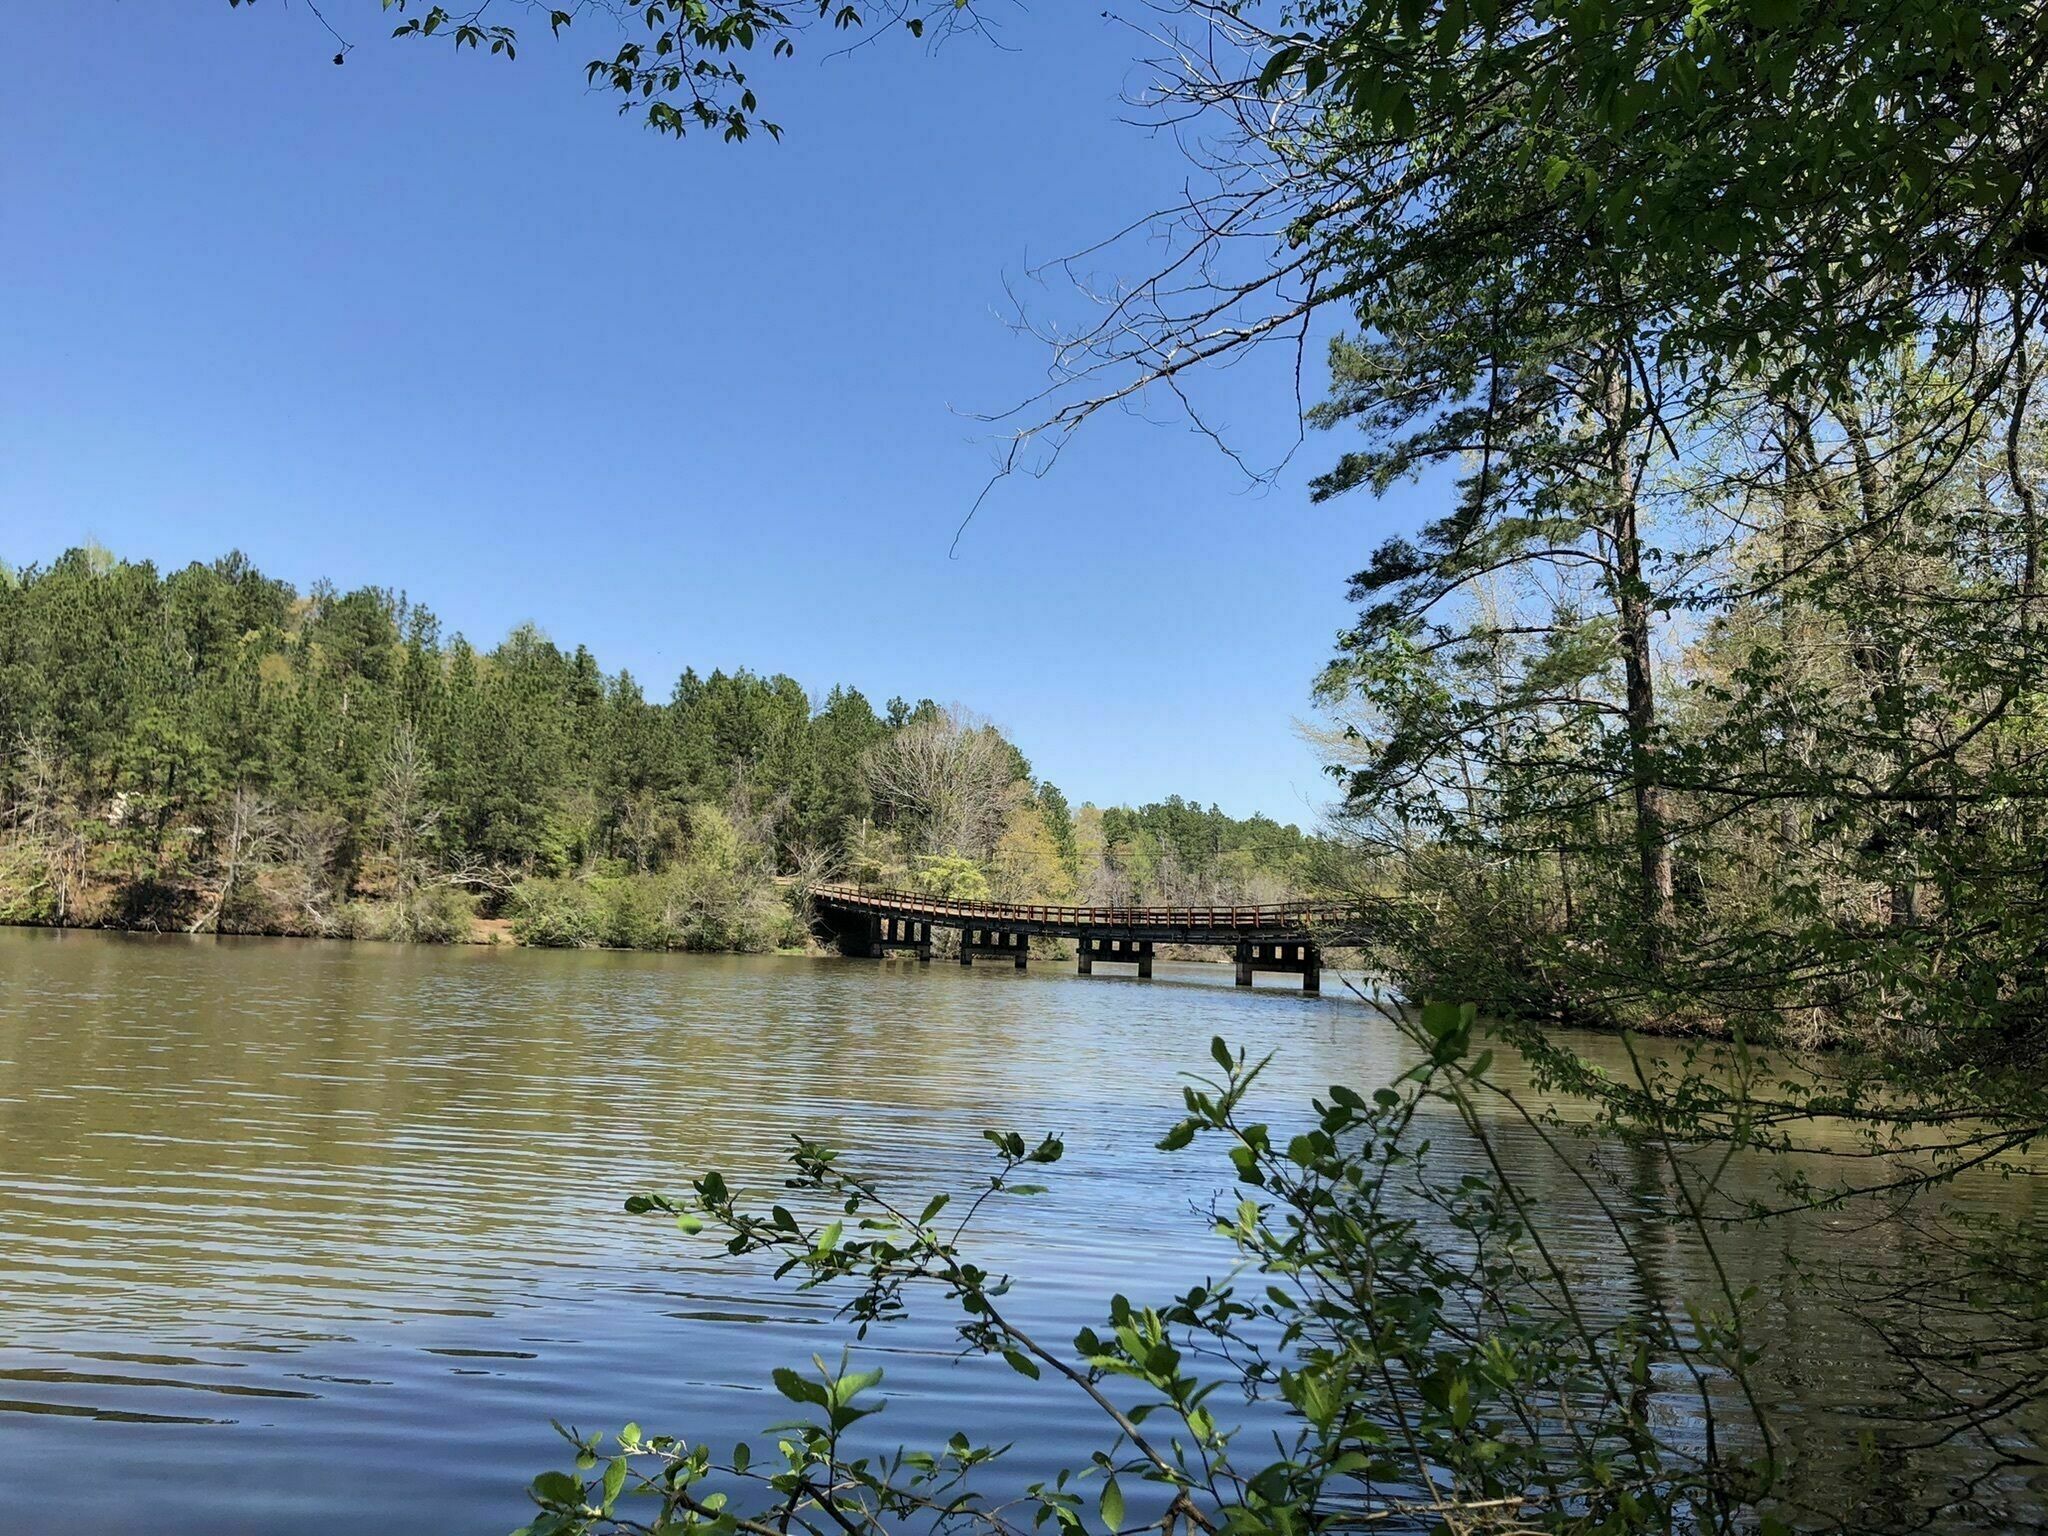 The Alabama Scenic River Trail starts at the beginning of the state at the Alabama and Georgia Line, in the Coosa River. 